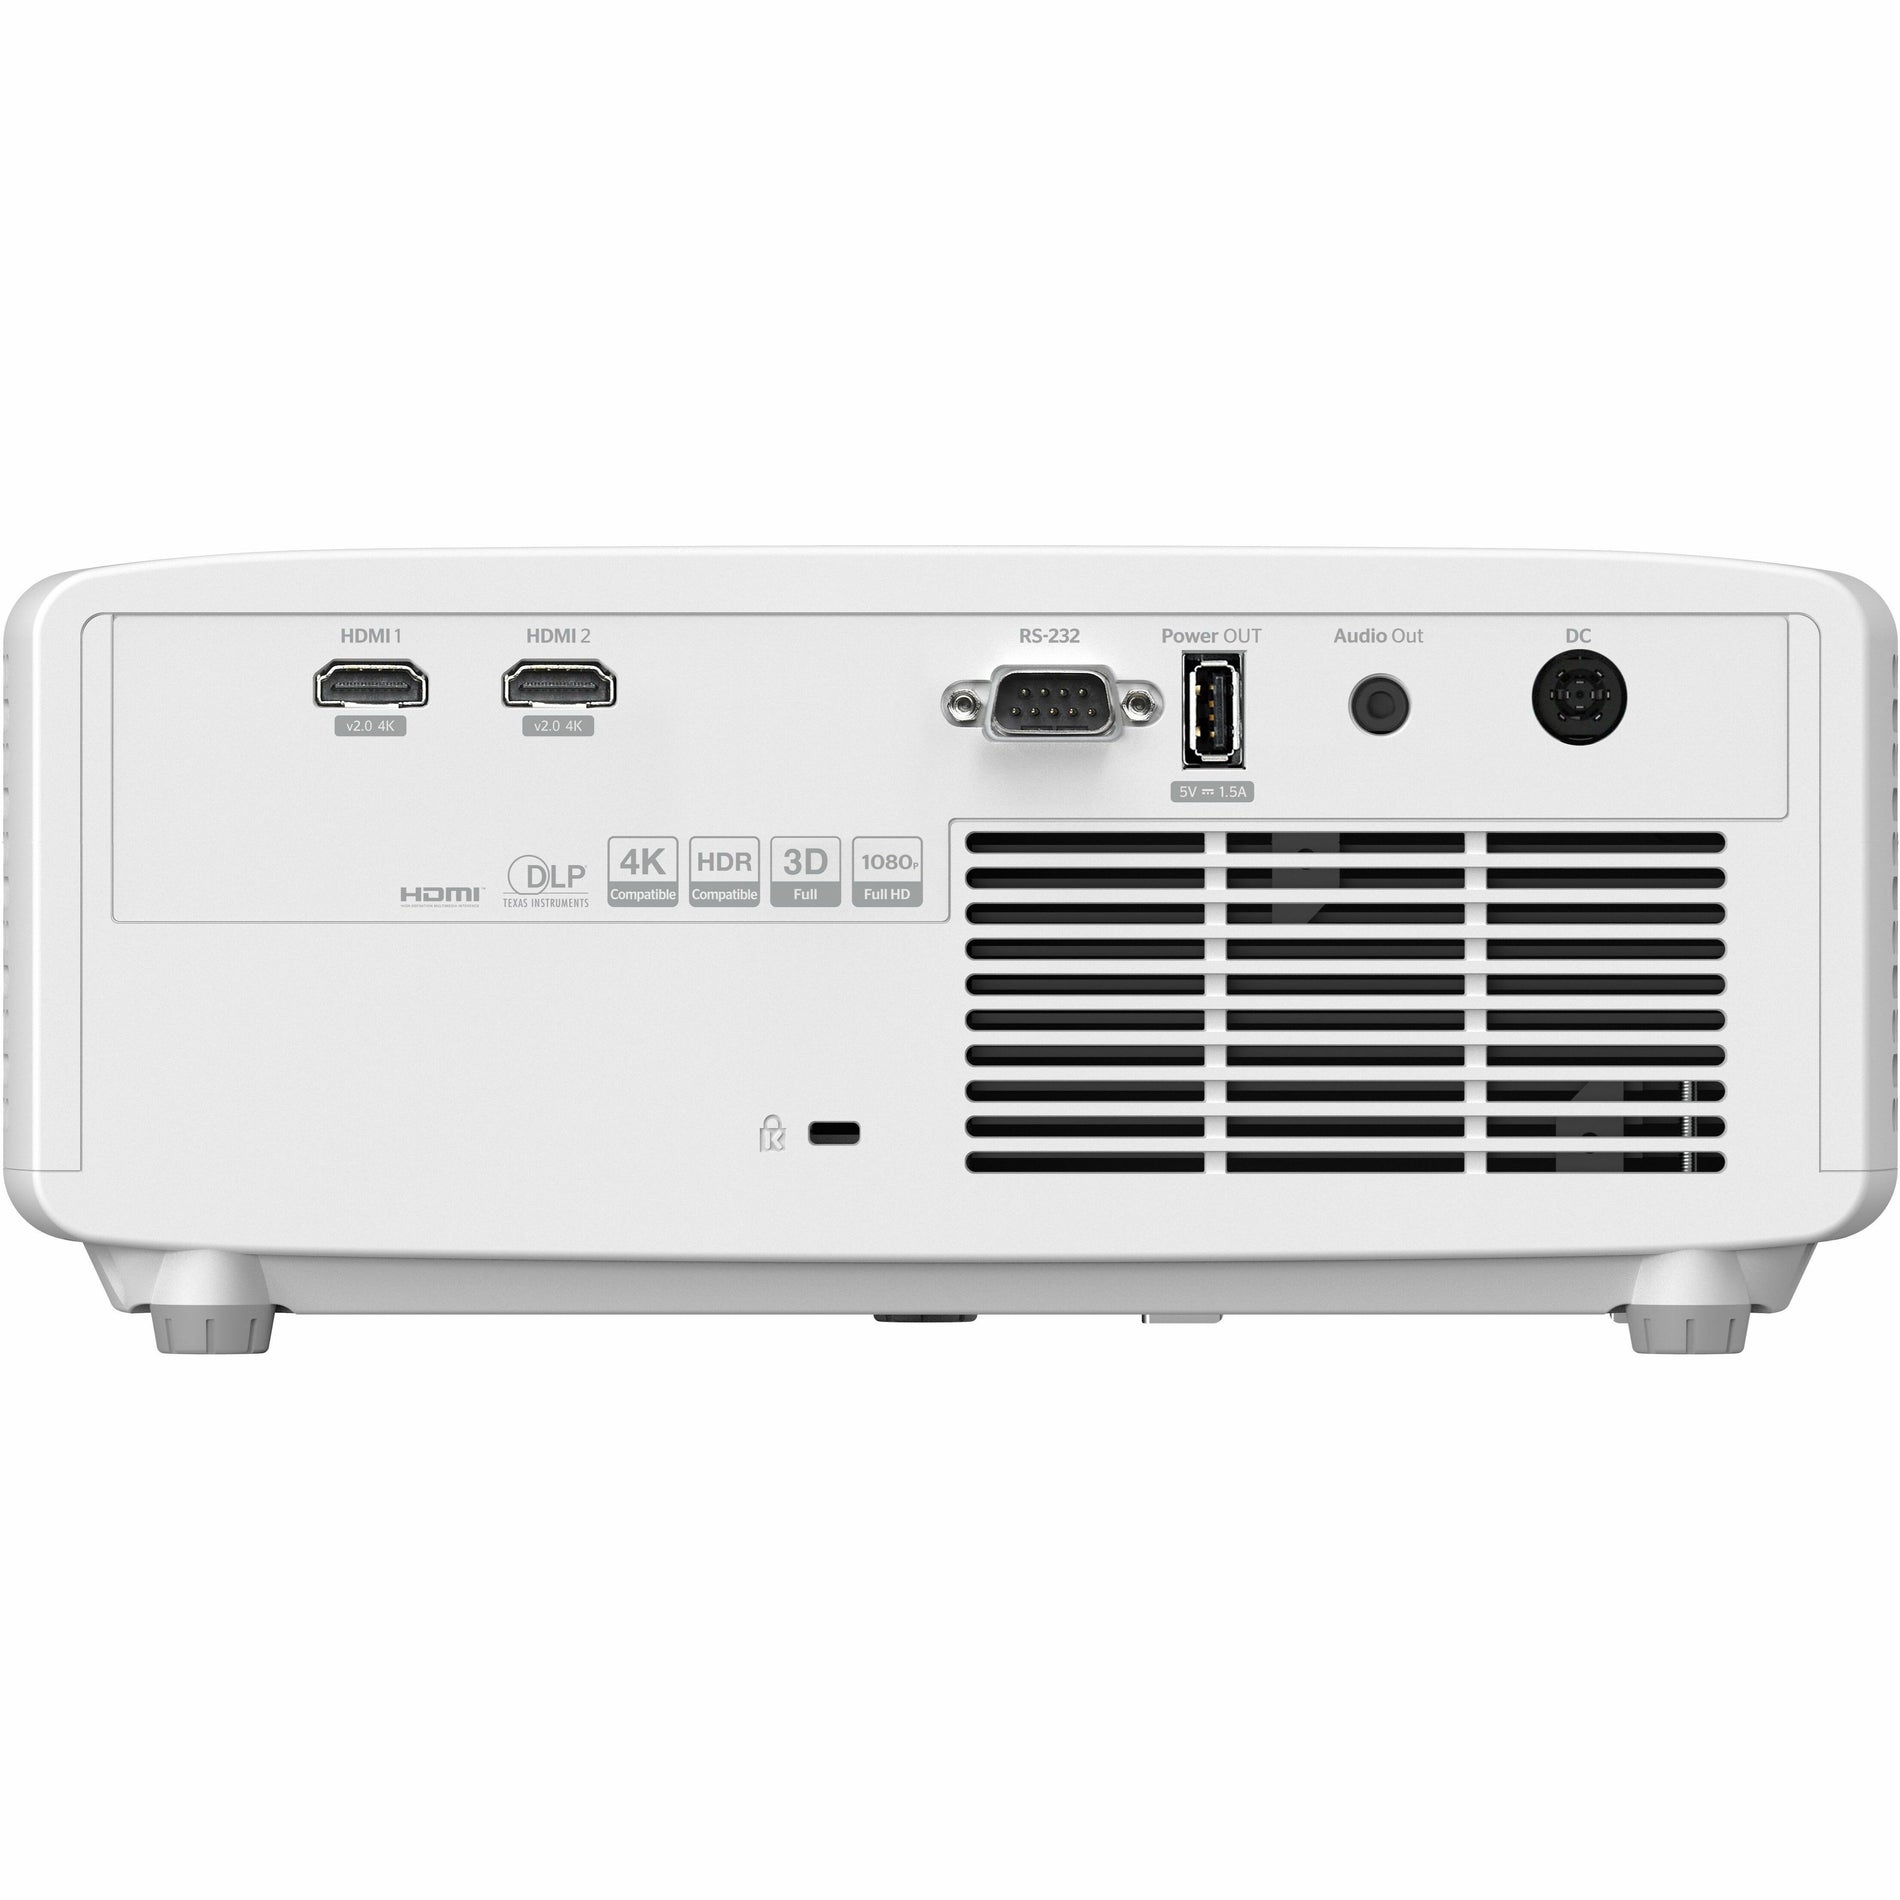 Optoma ZH400 DuraCore 3D DLP Projector, 16:9, 4000 lm, Laser Lamp, 30000 Hour Lamp Life